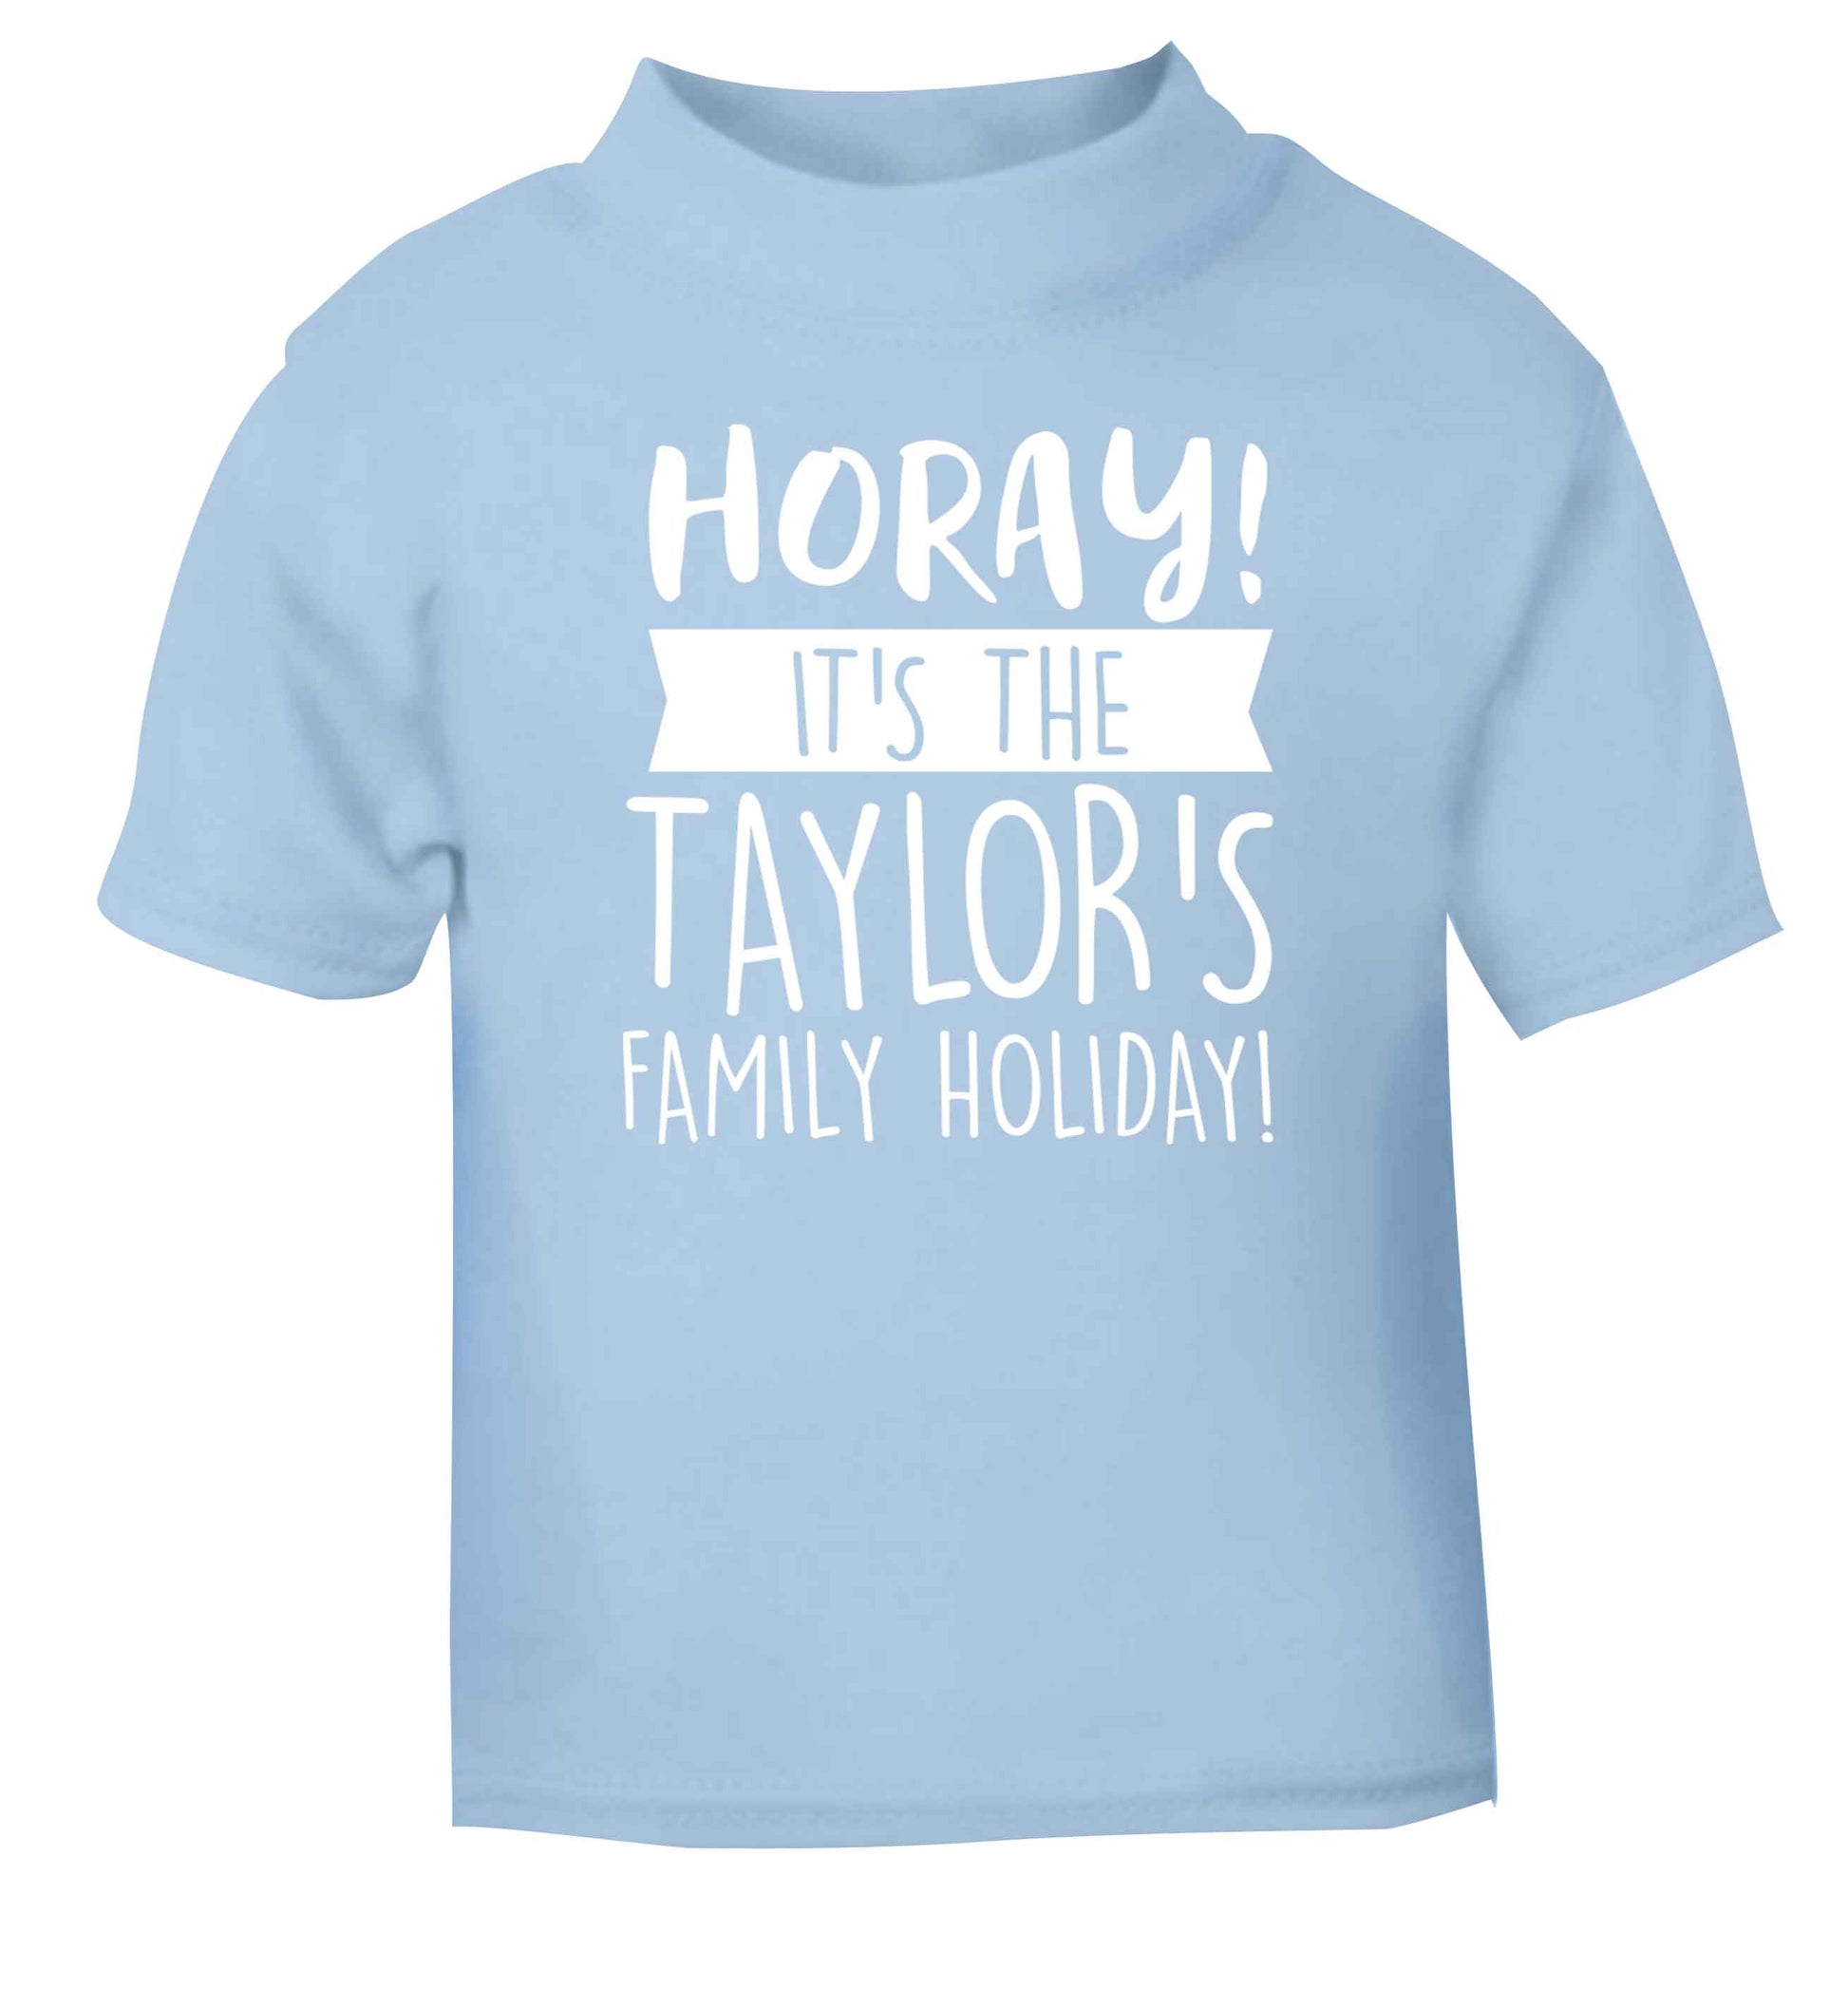 Horay it's the Taylor's family holiday! personalised item light blue Baby Toddler Tshirt 2 Years